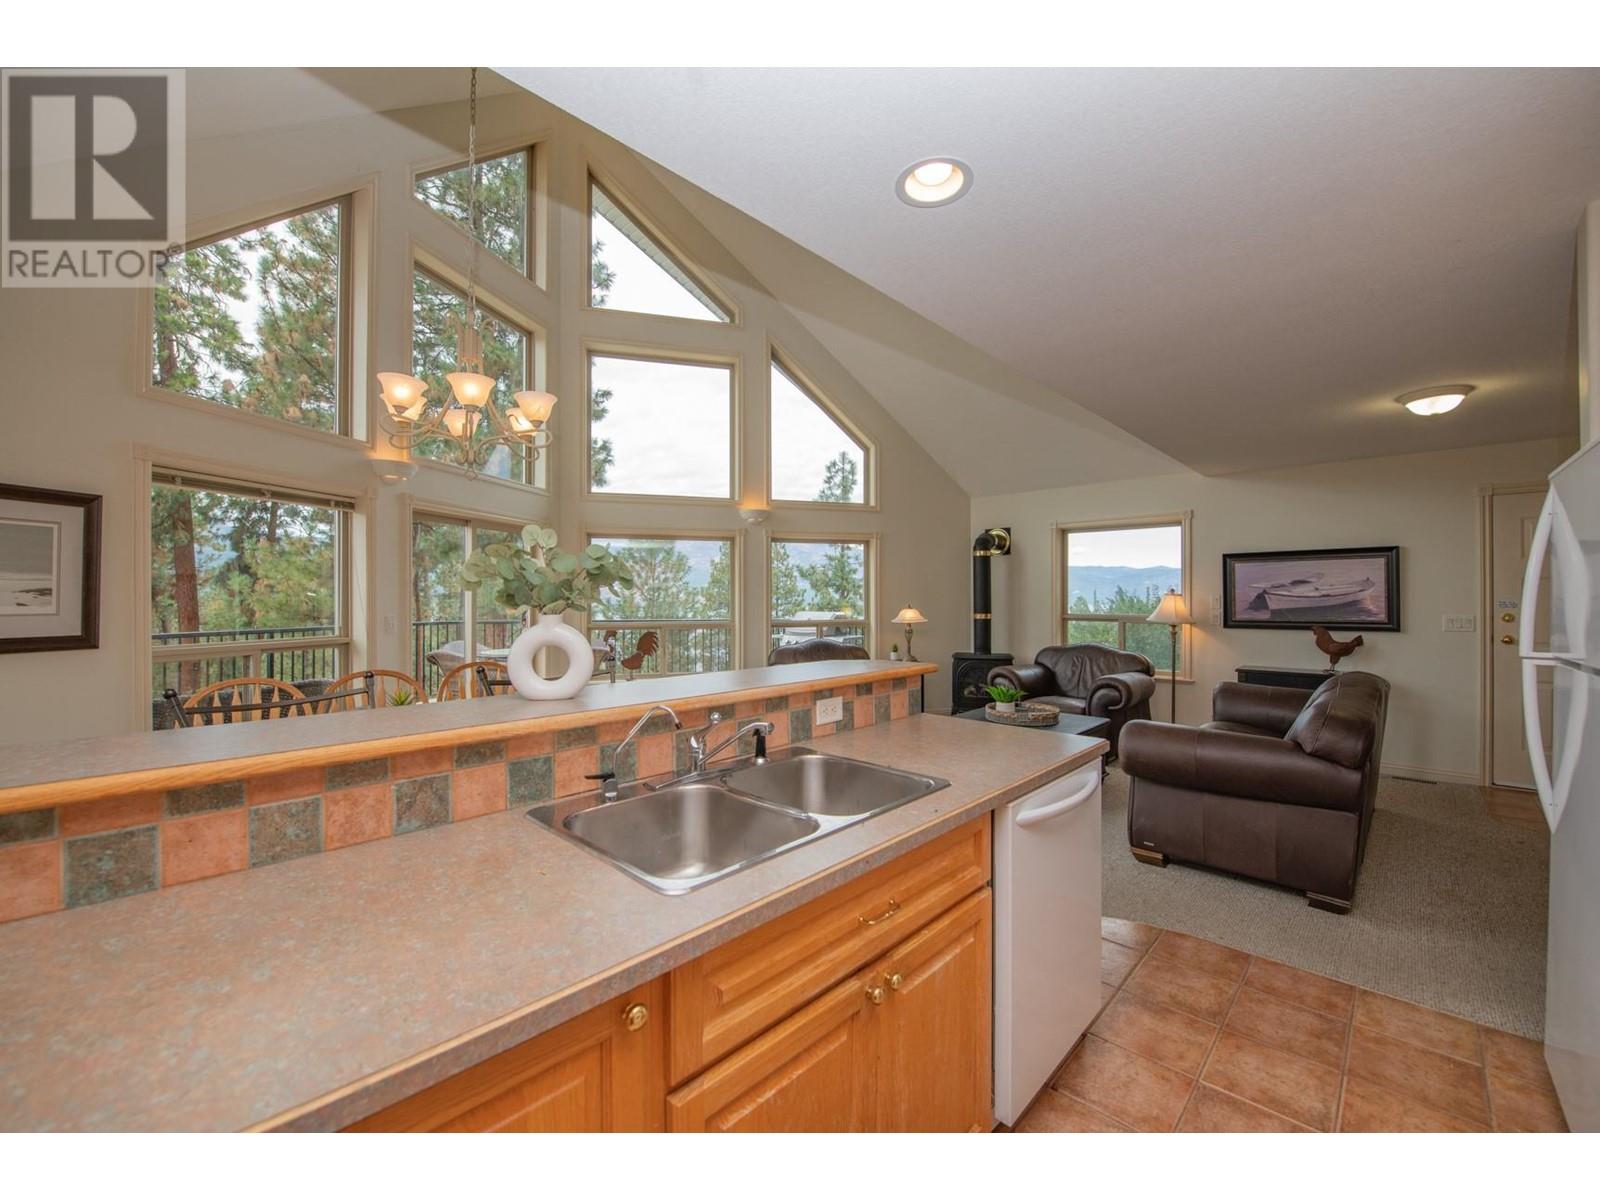  16490 Commonage Road, Lake Country